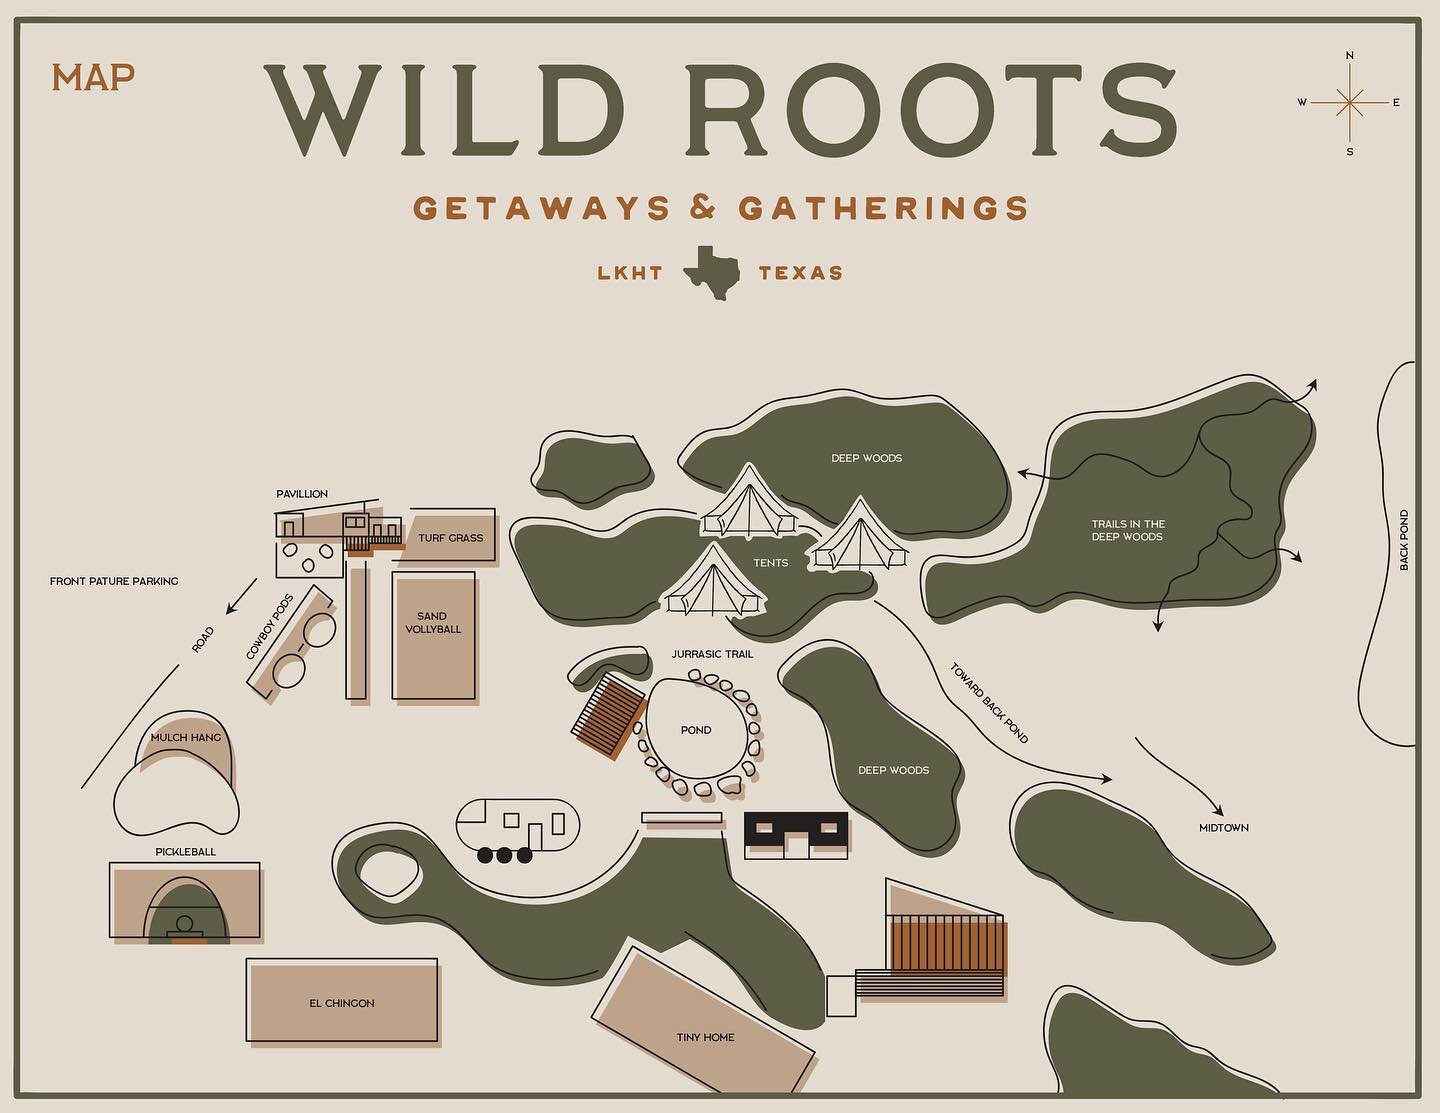 The coolest freakin map of Wild Roots sketched by our very own @ethanjosephjean 🤯